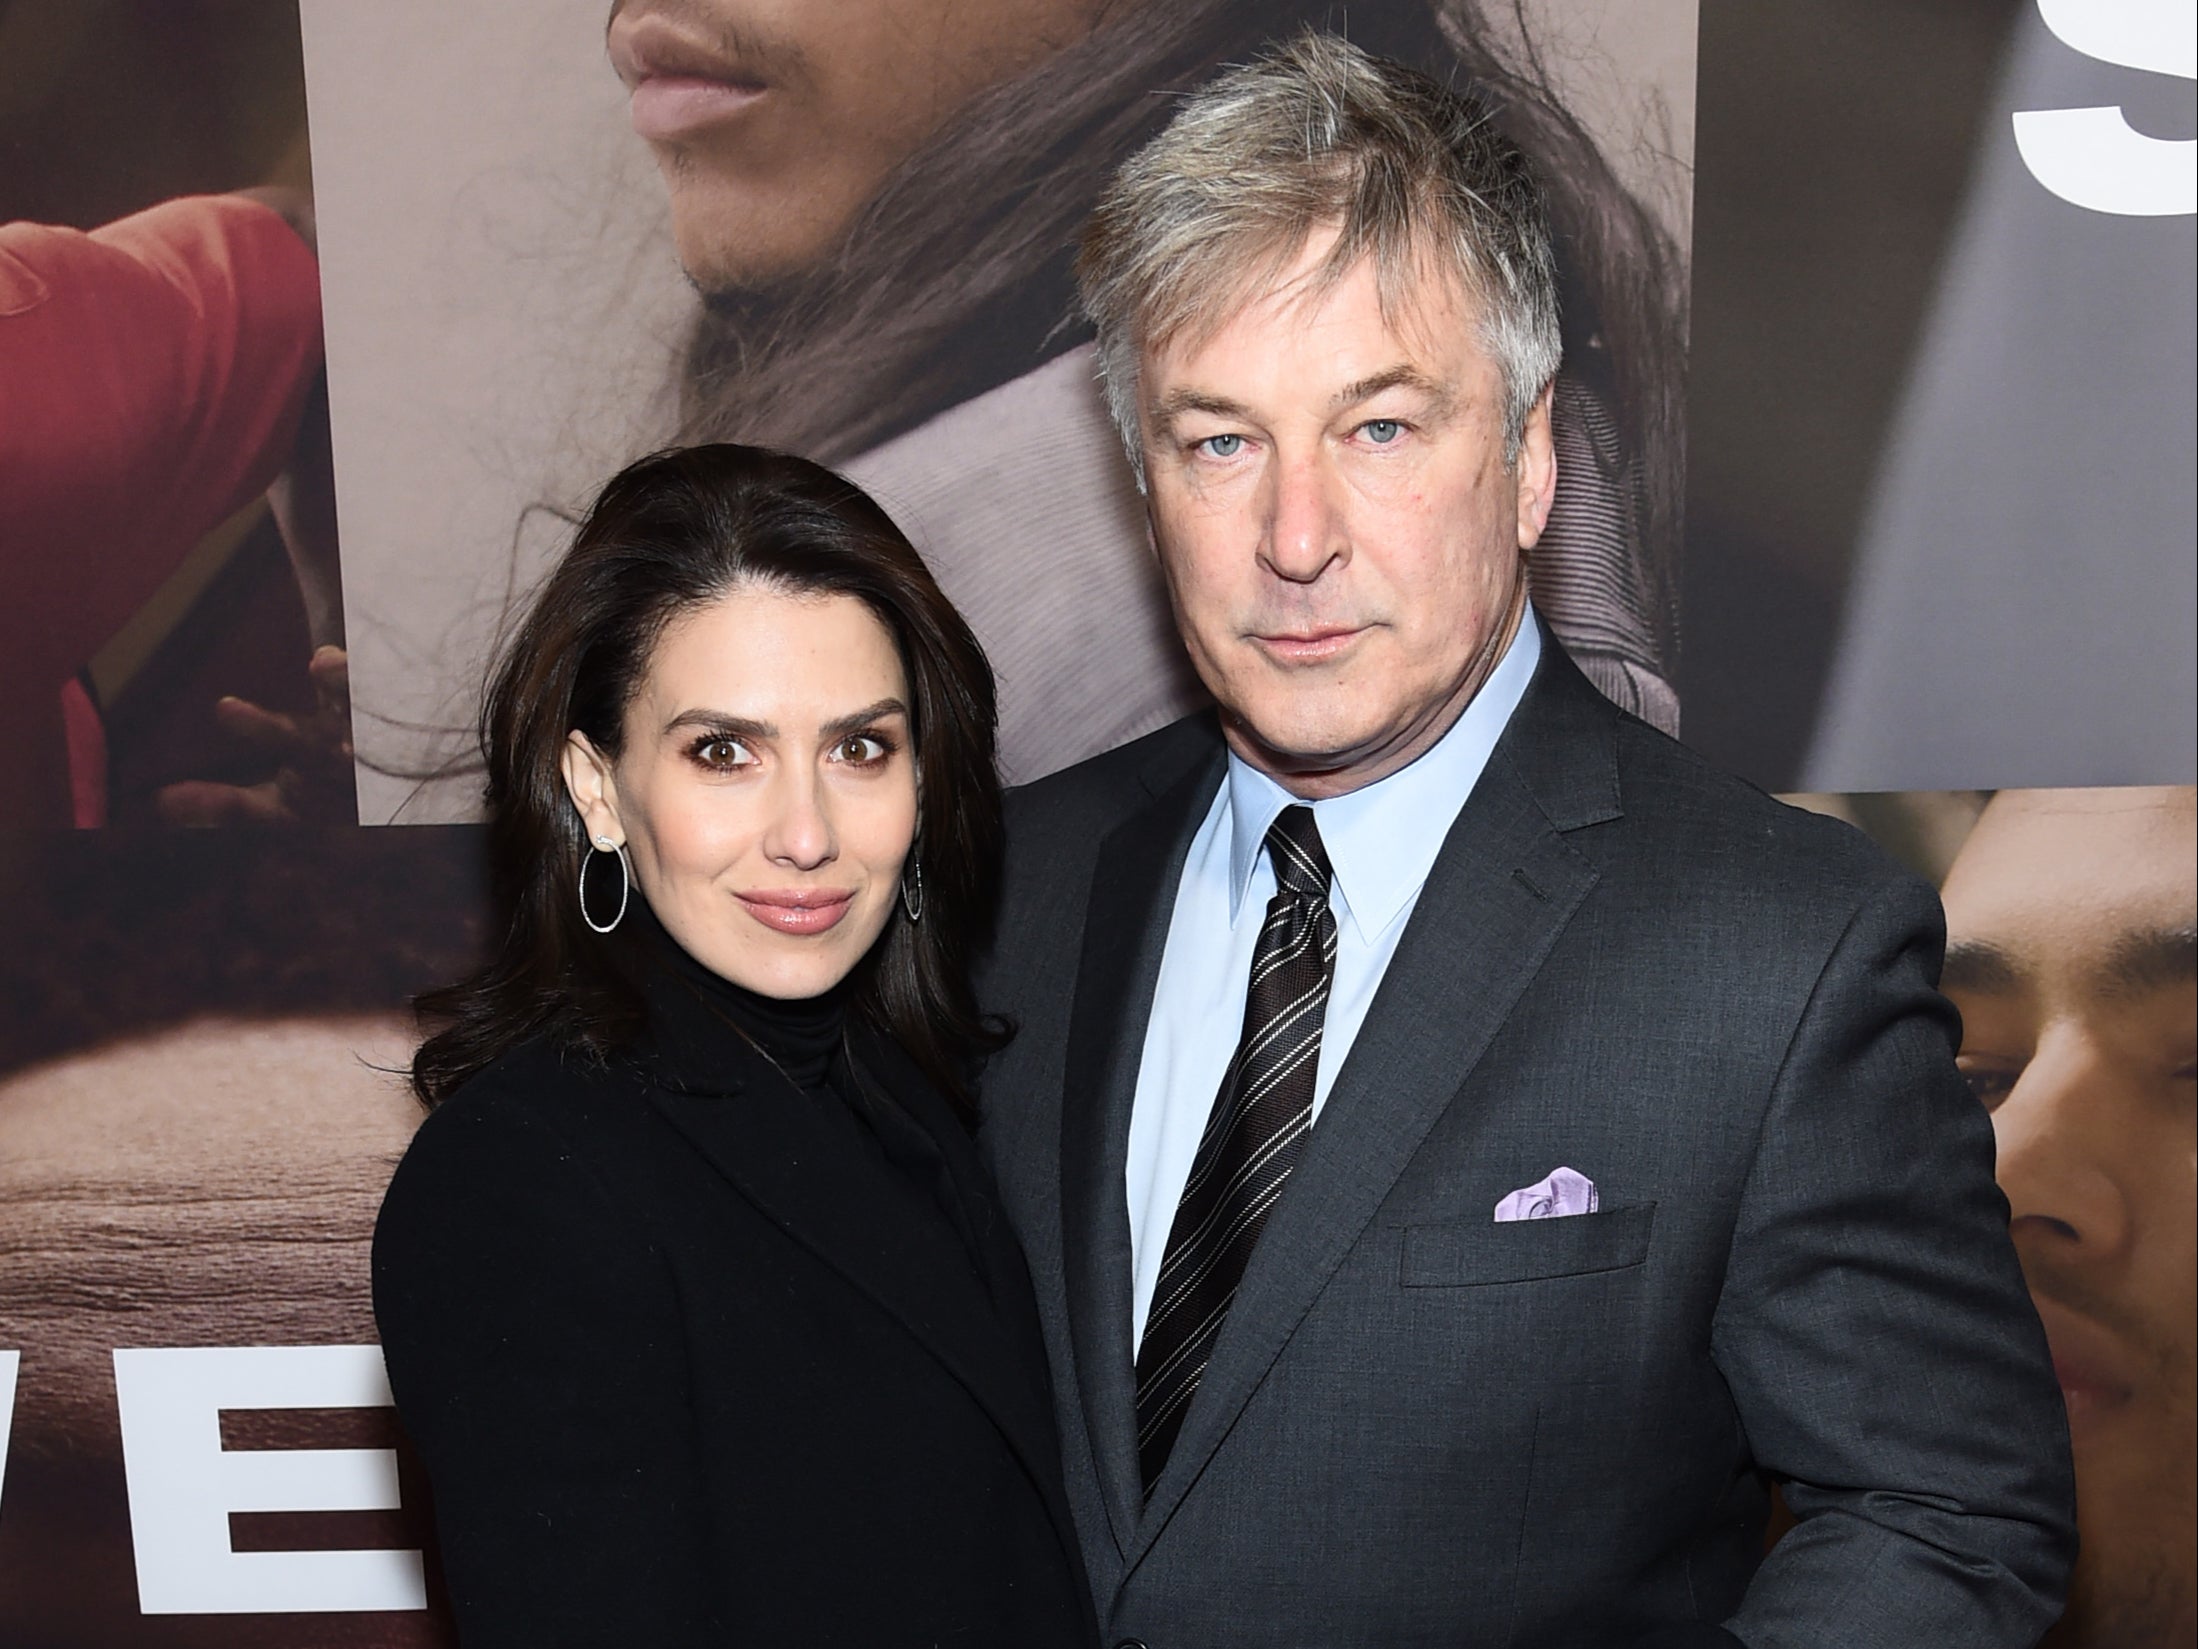 Woman who exposed Hilaria Baldwin says she is afraid Alec Baldwin will ‘punch’ her